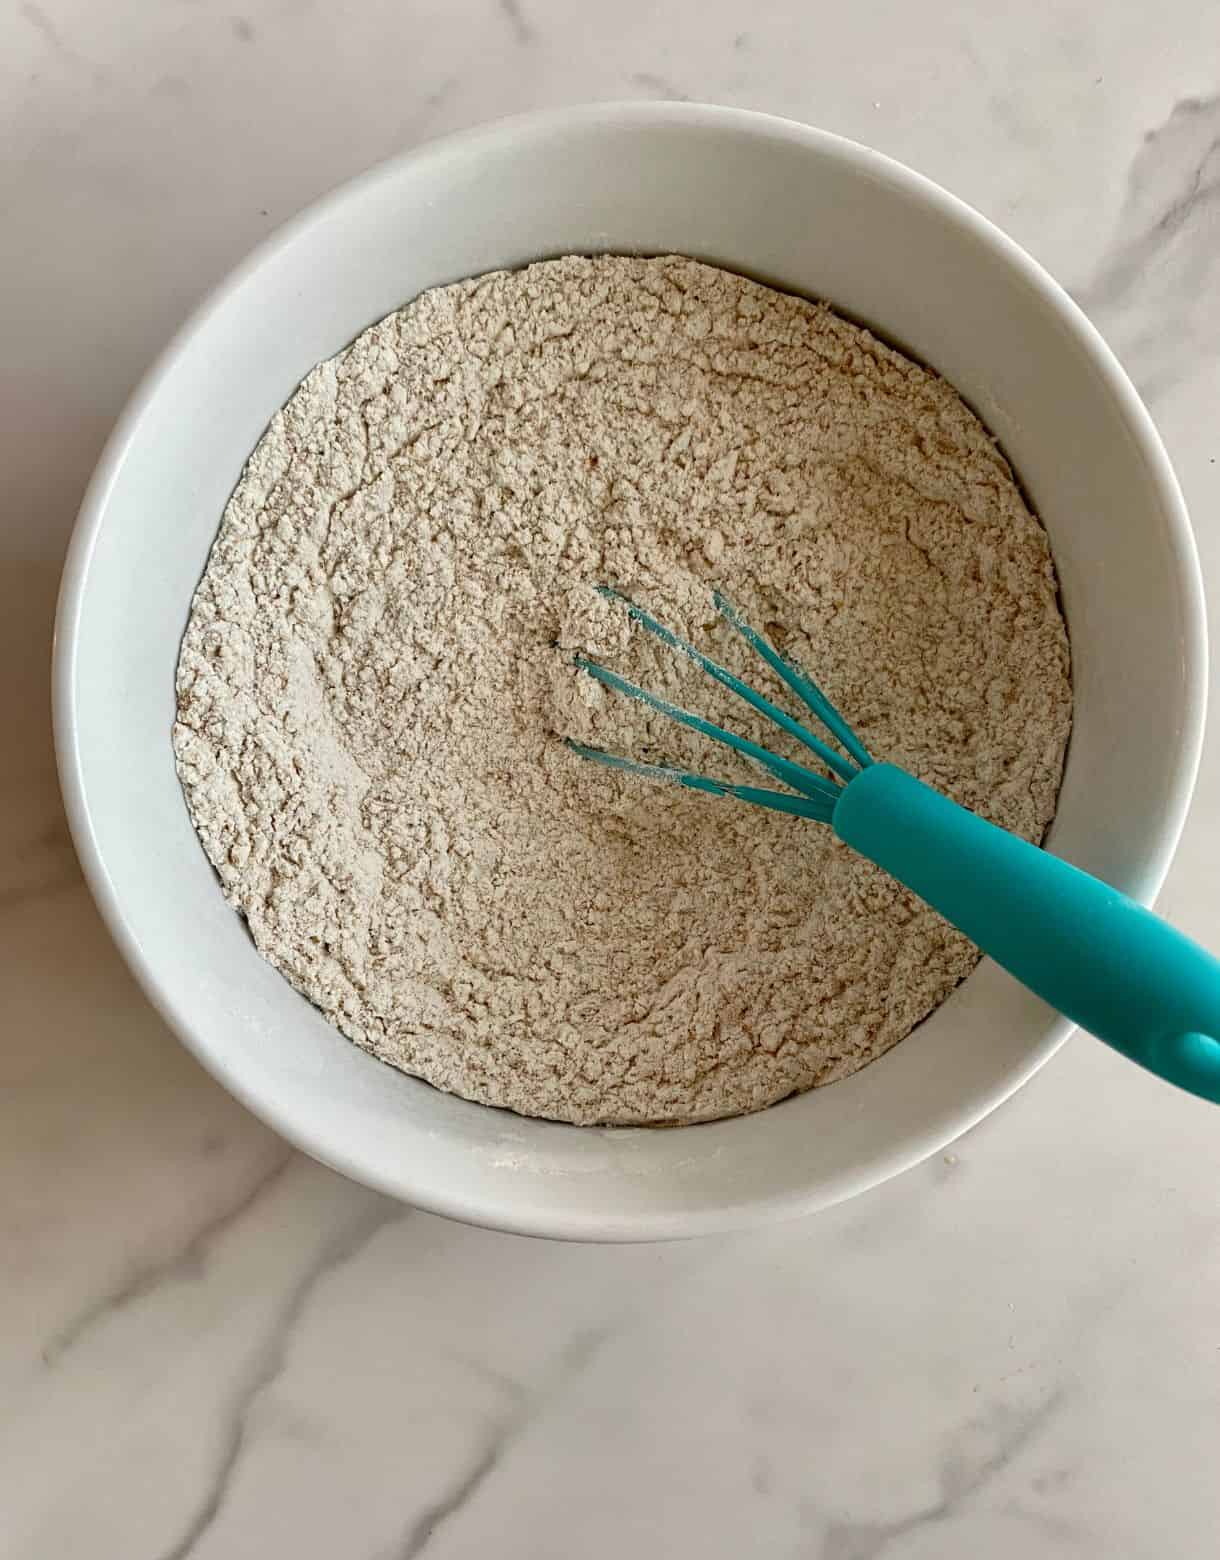 A bowl of all-purpose flour, whole wheat flour and baking soda mixed together with a whisk.